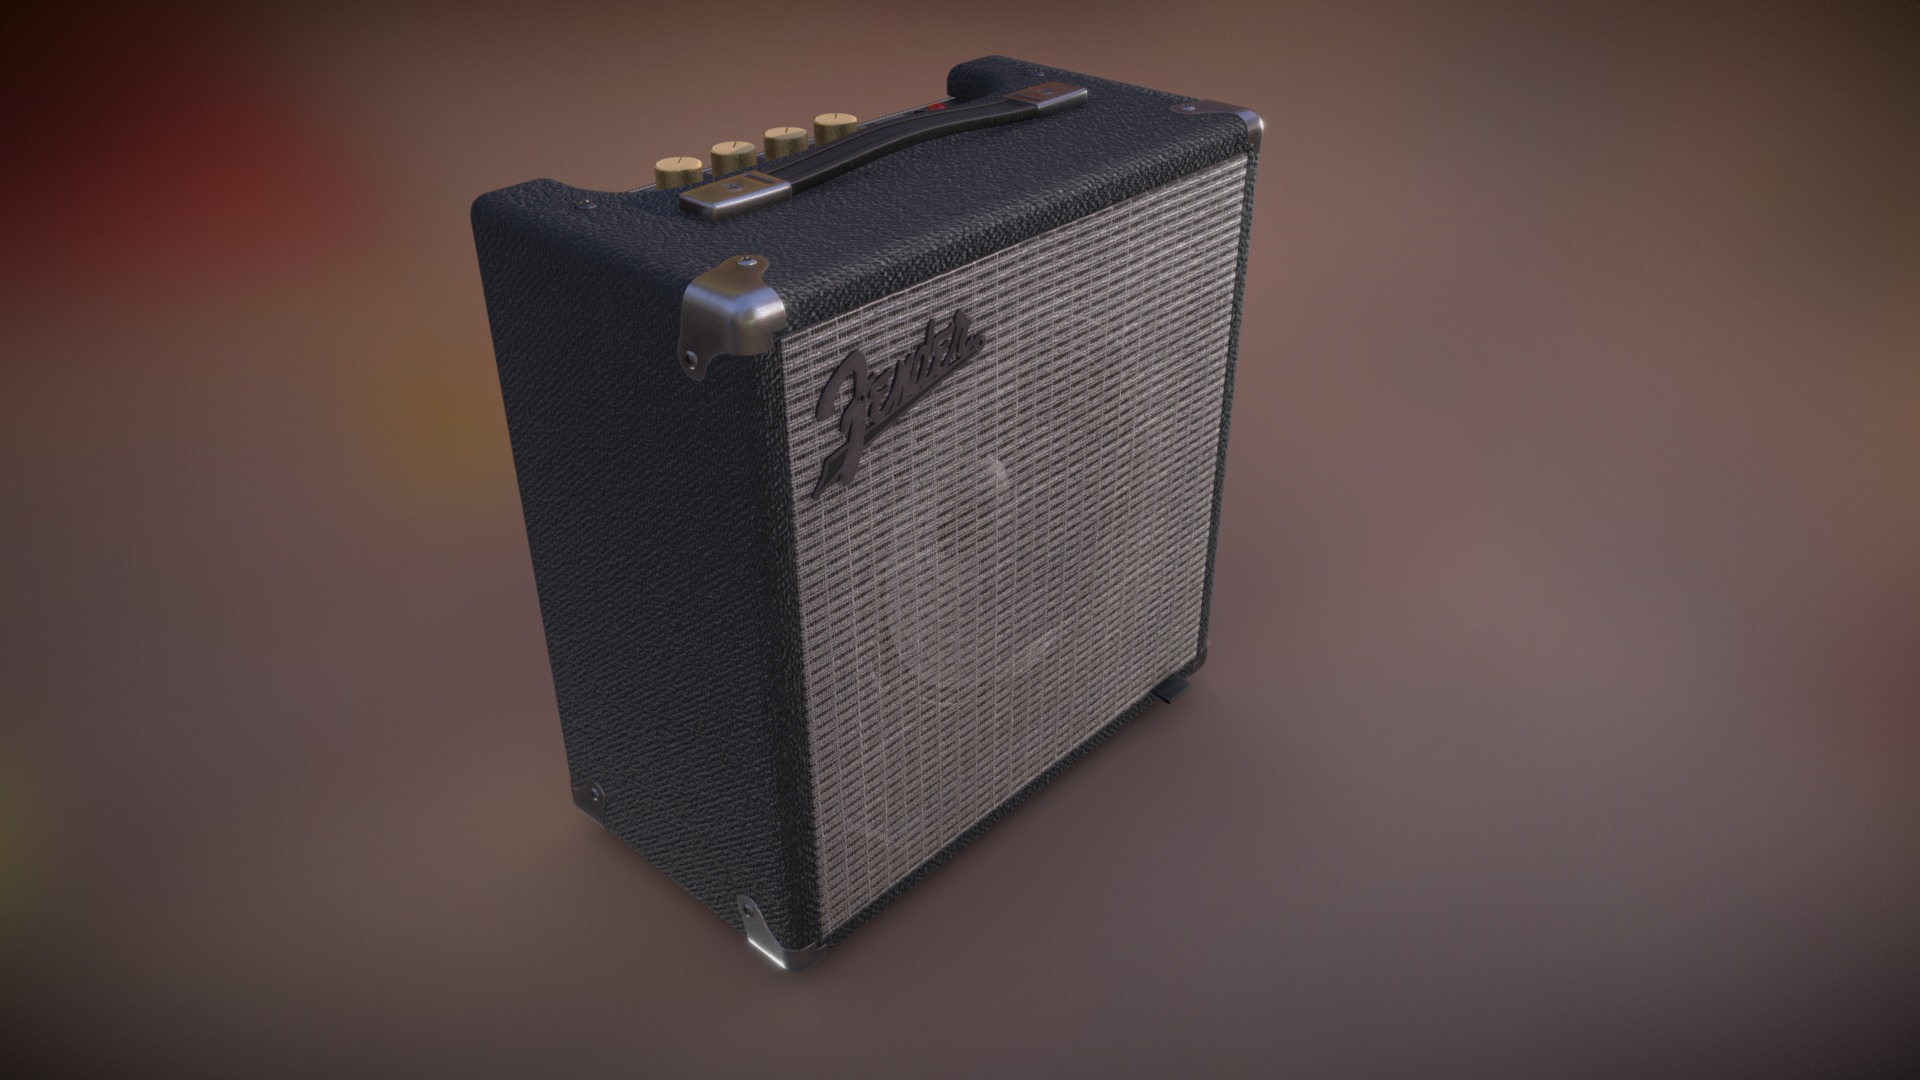 3D model Fender Rumble 15 Bass Amp High-Poly - This is a 3D model of the Fender Rumble 15 Bass Amp High-Poly. The 3D model is about a black rectangular object with a metal handle on a brown surface.